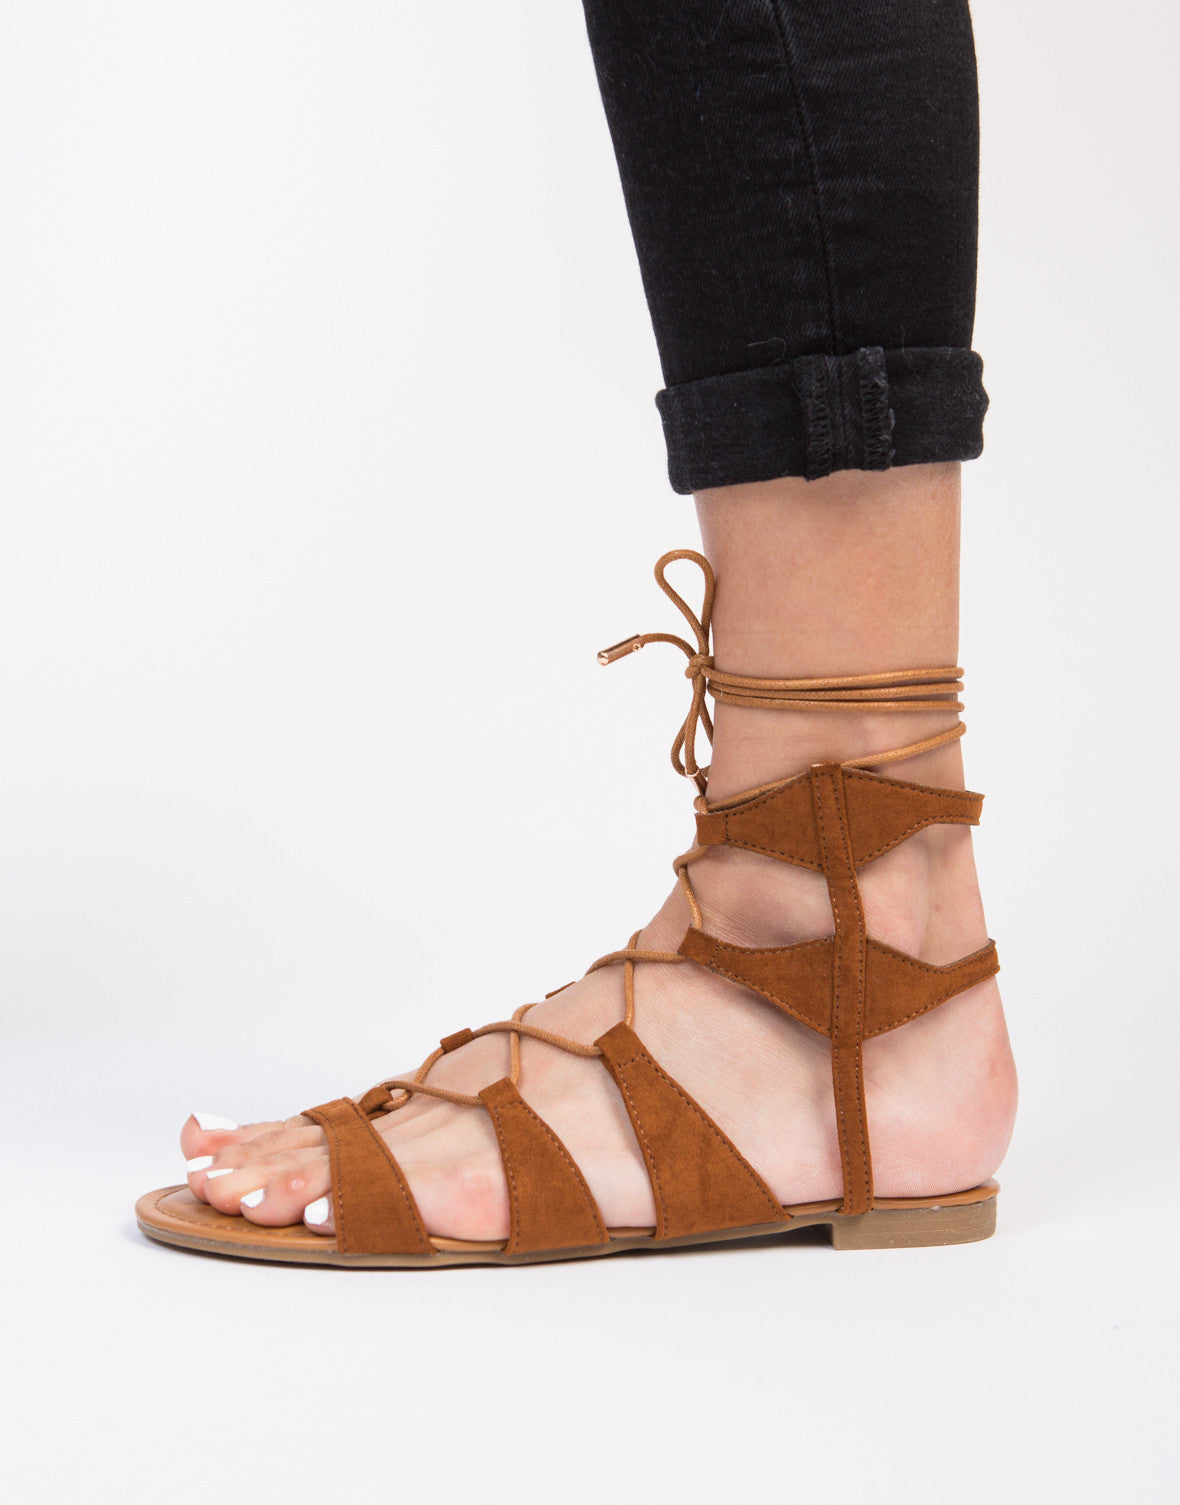 Suede Lace-Up Sandals - Black Strappy Sandals -Suede Ankle Gladiator ...